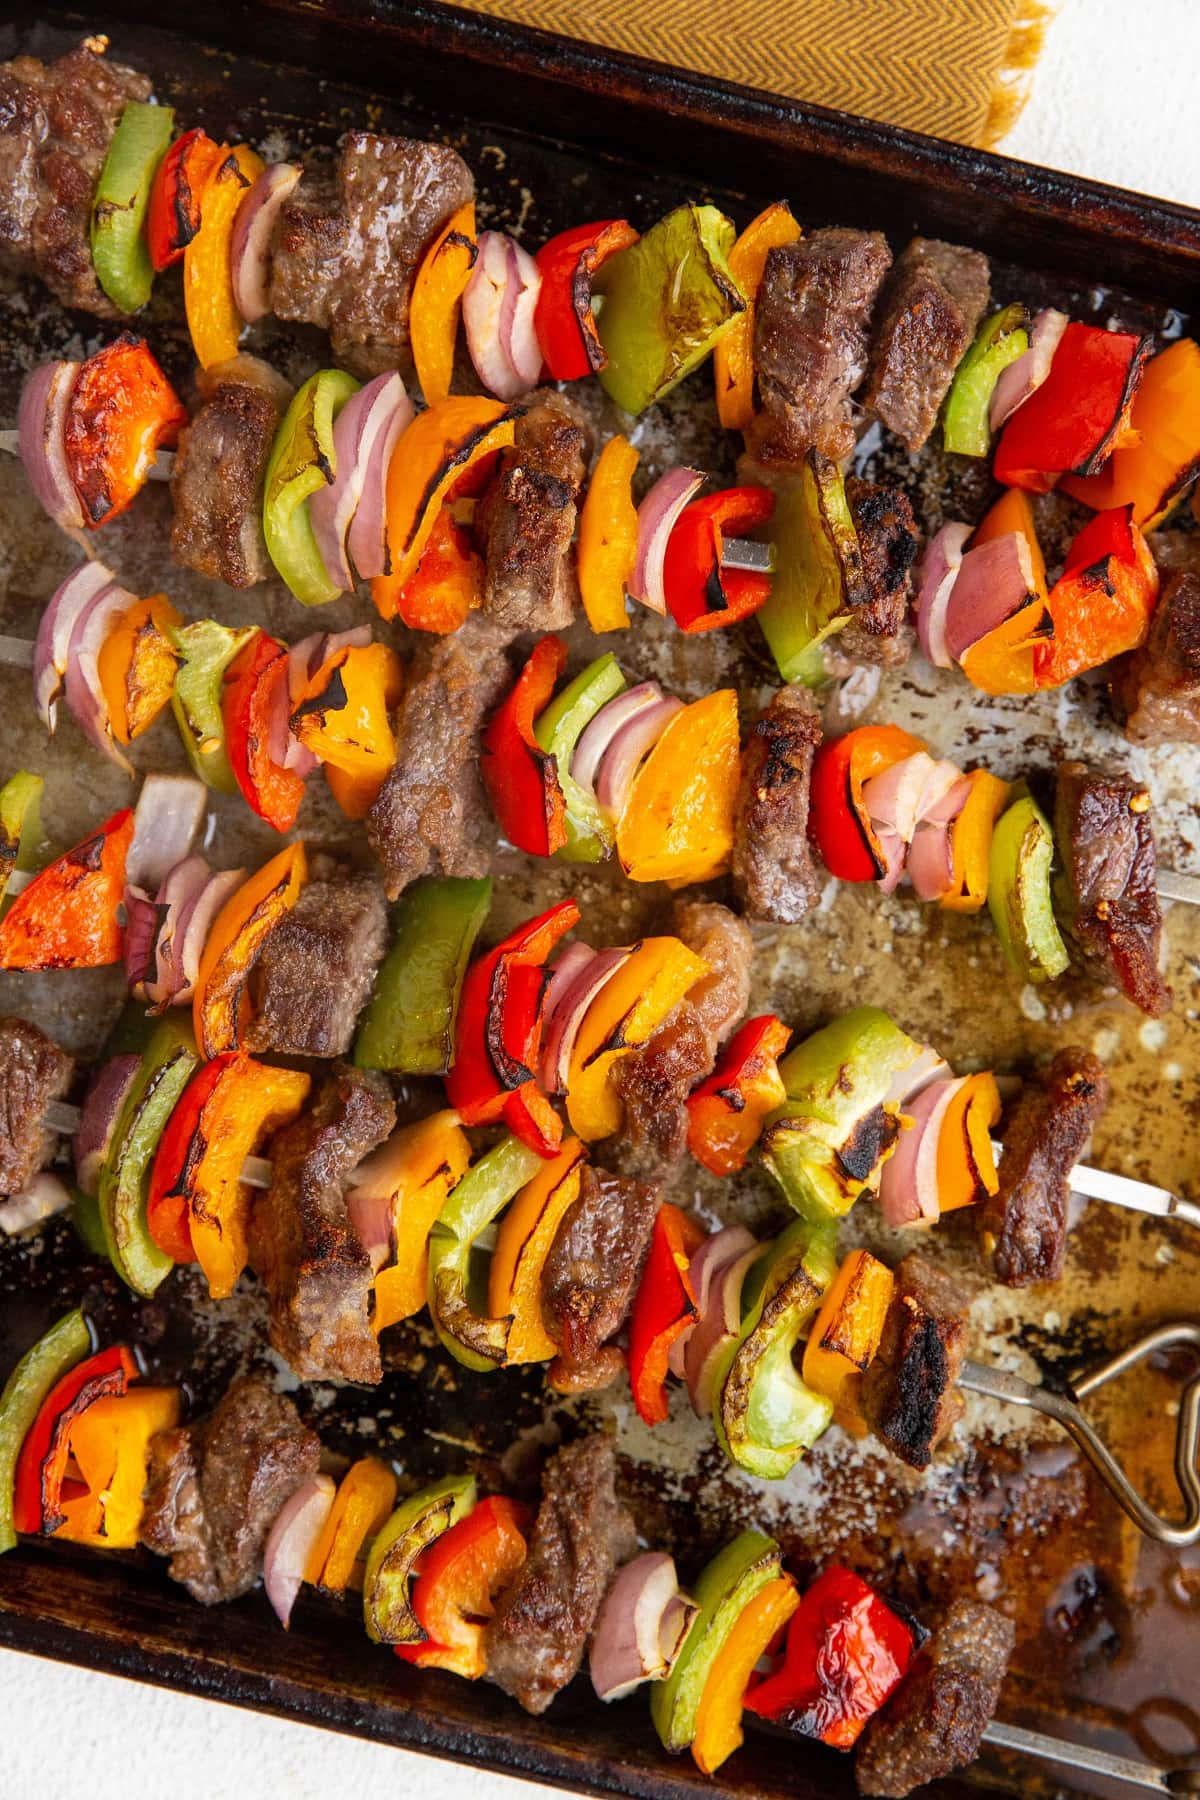 Steak Kabobs on a large baking sheet, fresh out of the oven.